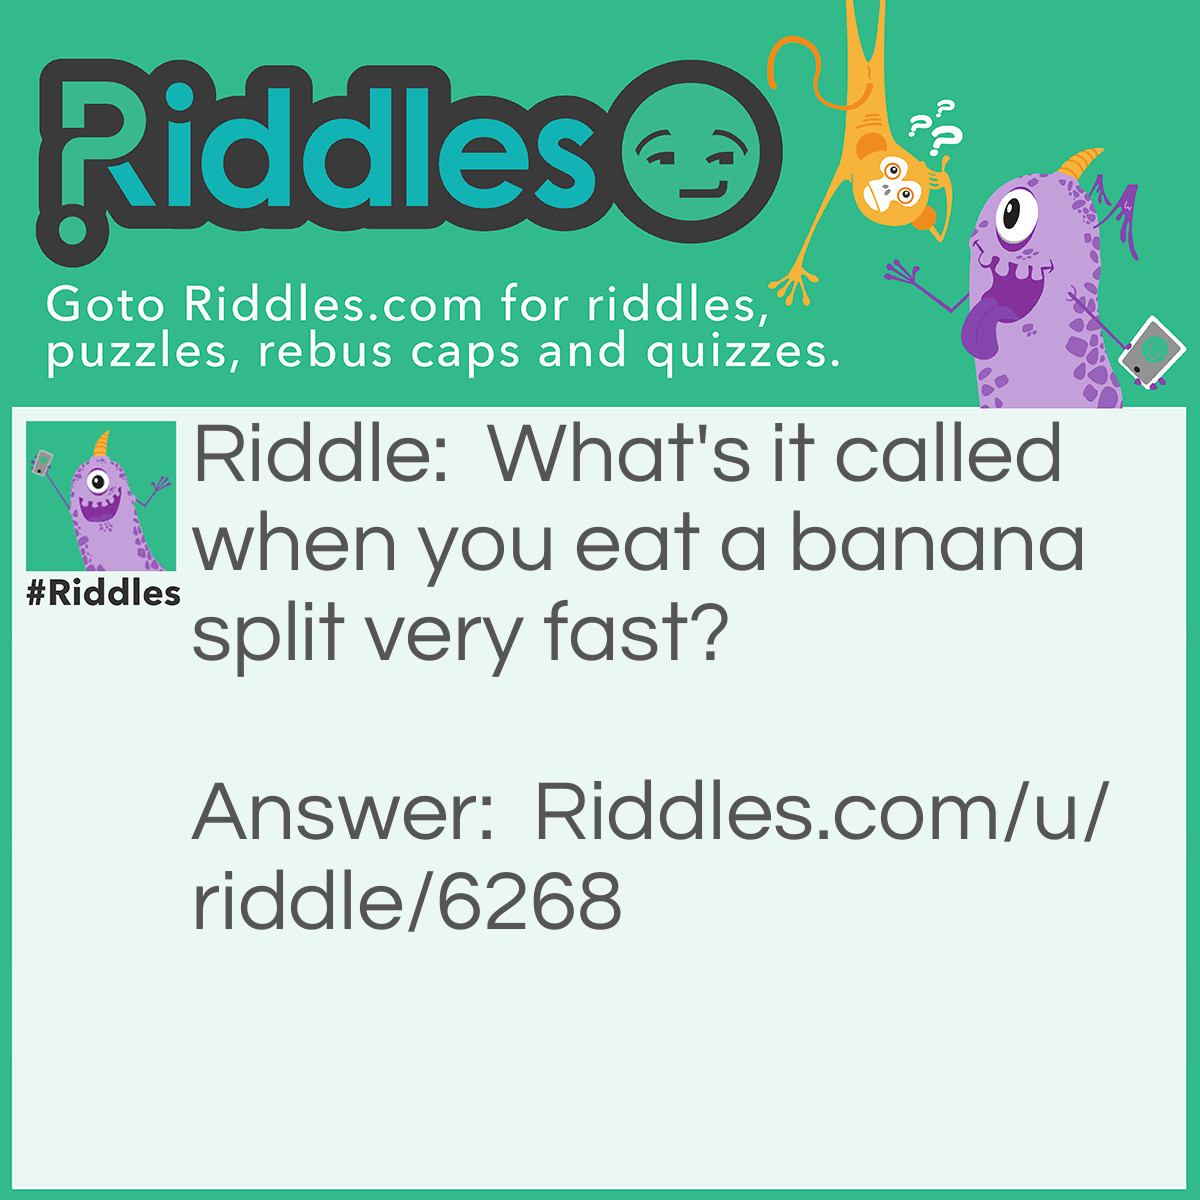 Riddle: What's it called when you eat a banana split very fast? Answer: Lickety split.